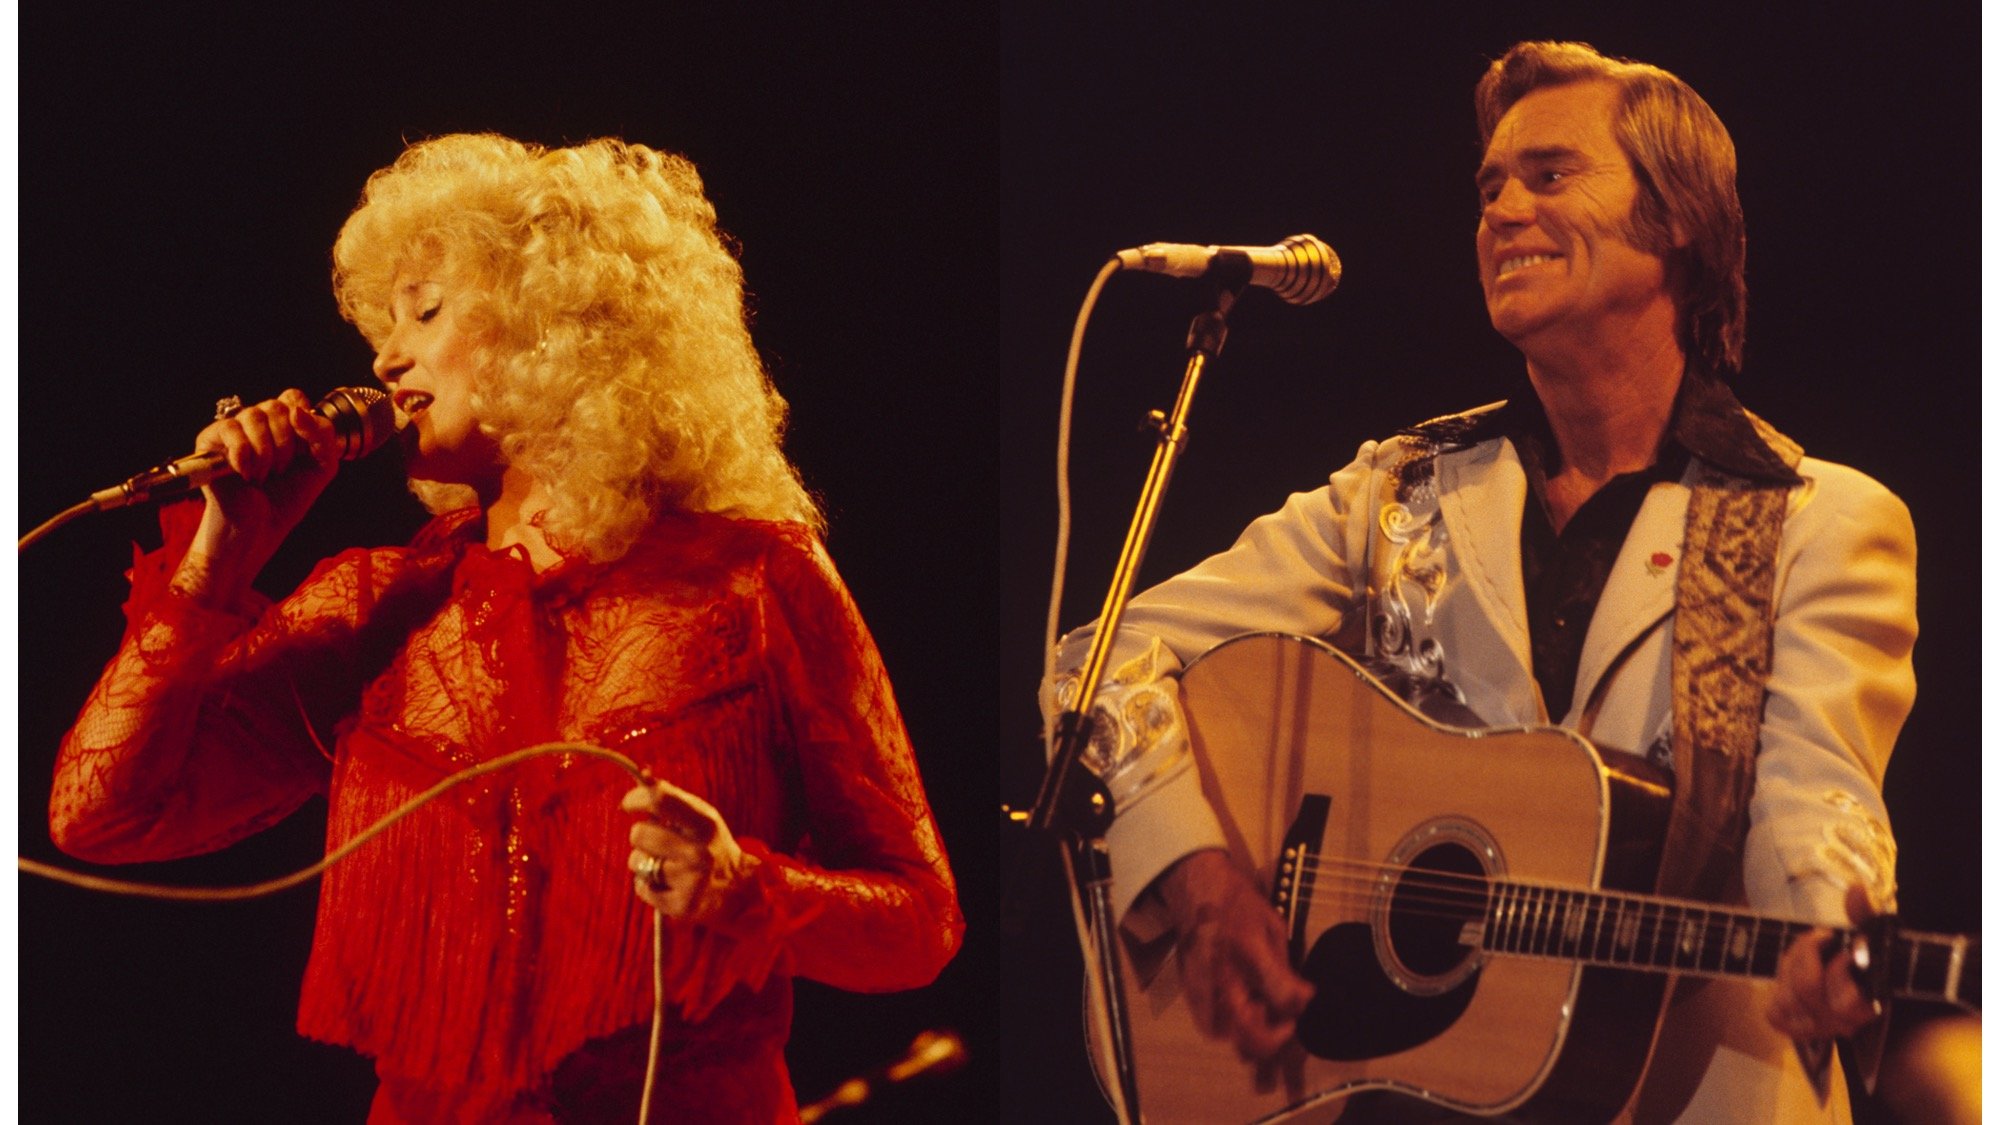 (L) Tammy Wynette performs on stage at the Country Music Festival held at Wembley Arena, London, in April 1981. (R) George Jones performs on stage at the Country Music Festival held at Wembley Arena, London, in April 1981.